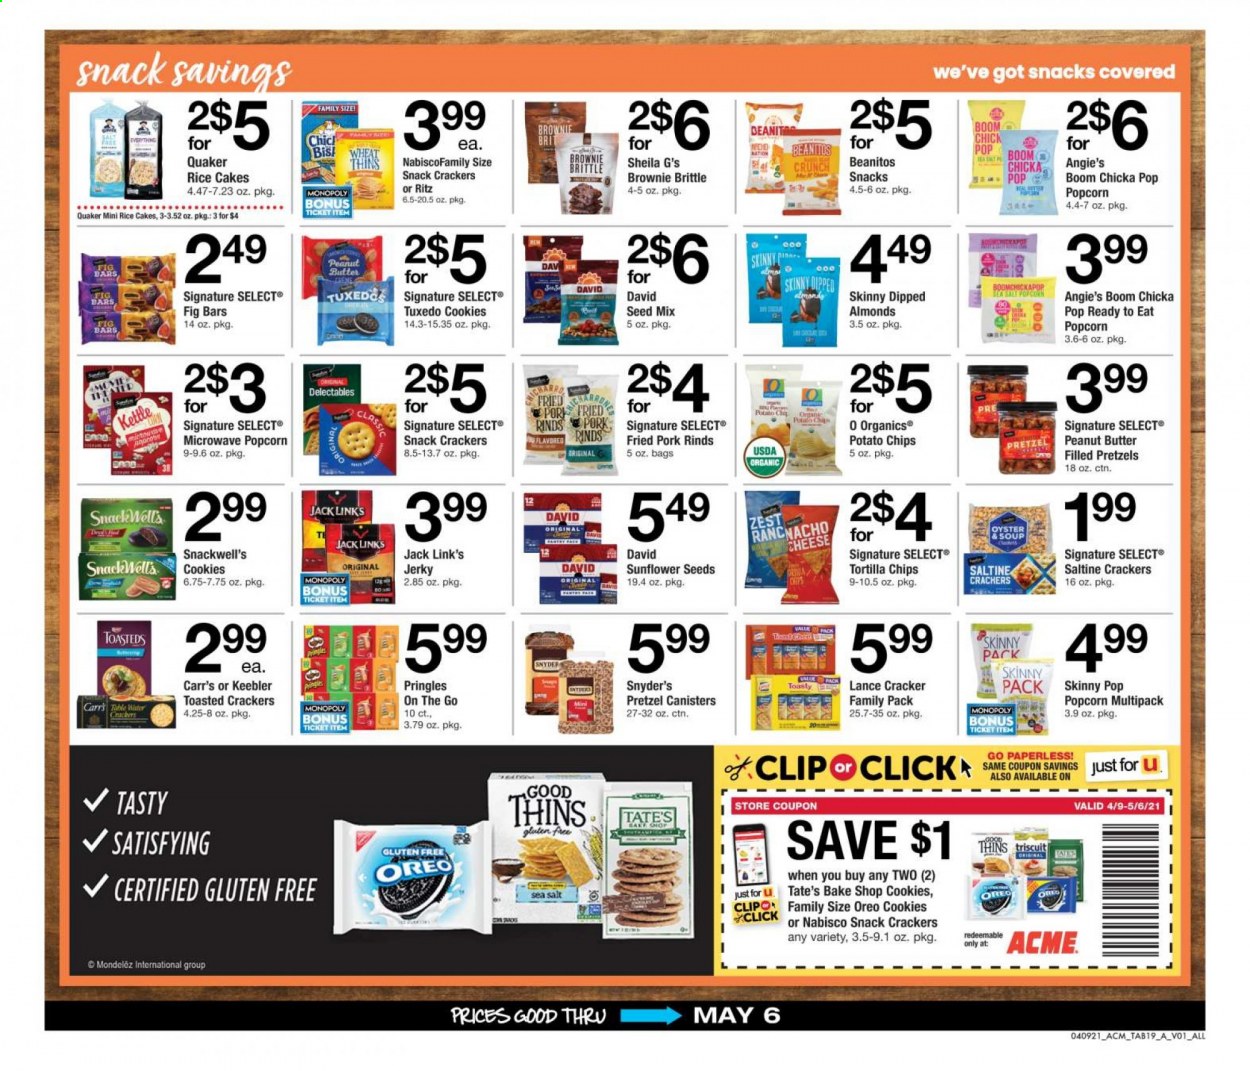 thumbnail - ACME Flyer - 04/09/2021 - 05/06/2021 - Sales products - pretzels, brownies, oysters, Quaker, jerky, cheese, Oreo, cookies, snack, crackers, Keebler, RITZ, tortilla chips, potato chips, Pringles, chips, Thins, popcorn, Skinny Pop, Jack Link's, rice, peanut butter, almonds, sunflower seeds, bag. Page 19.